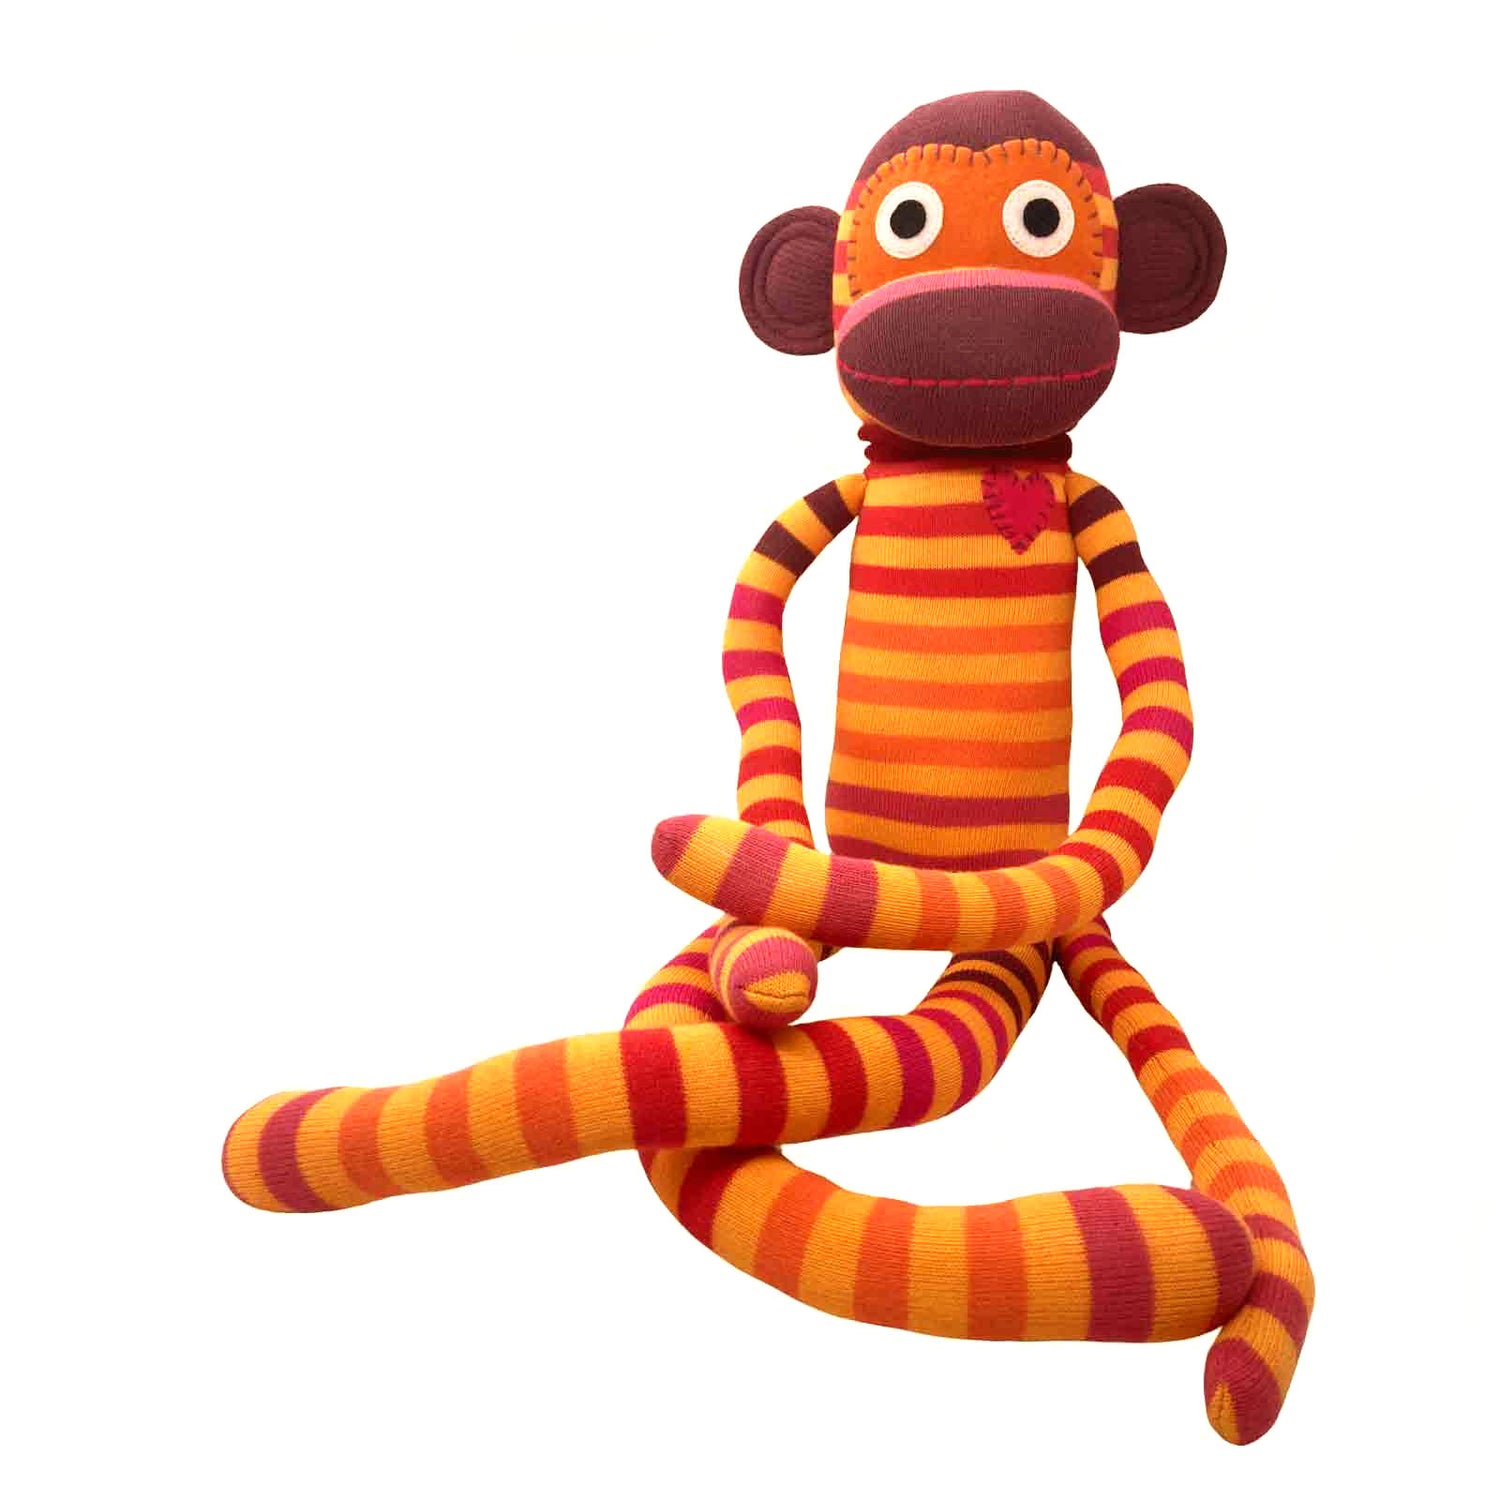 Jules the Sock Monkey - cute and cuddly available now